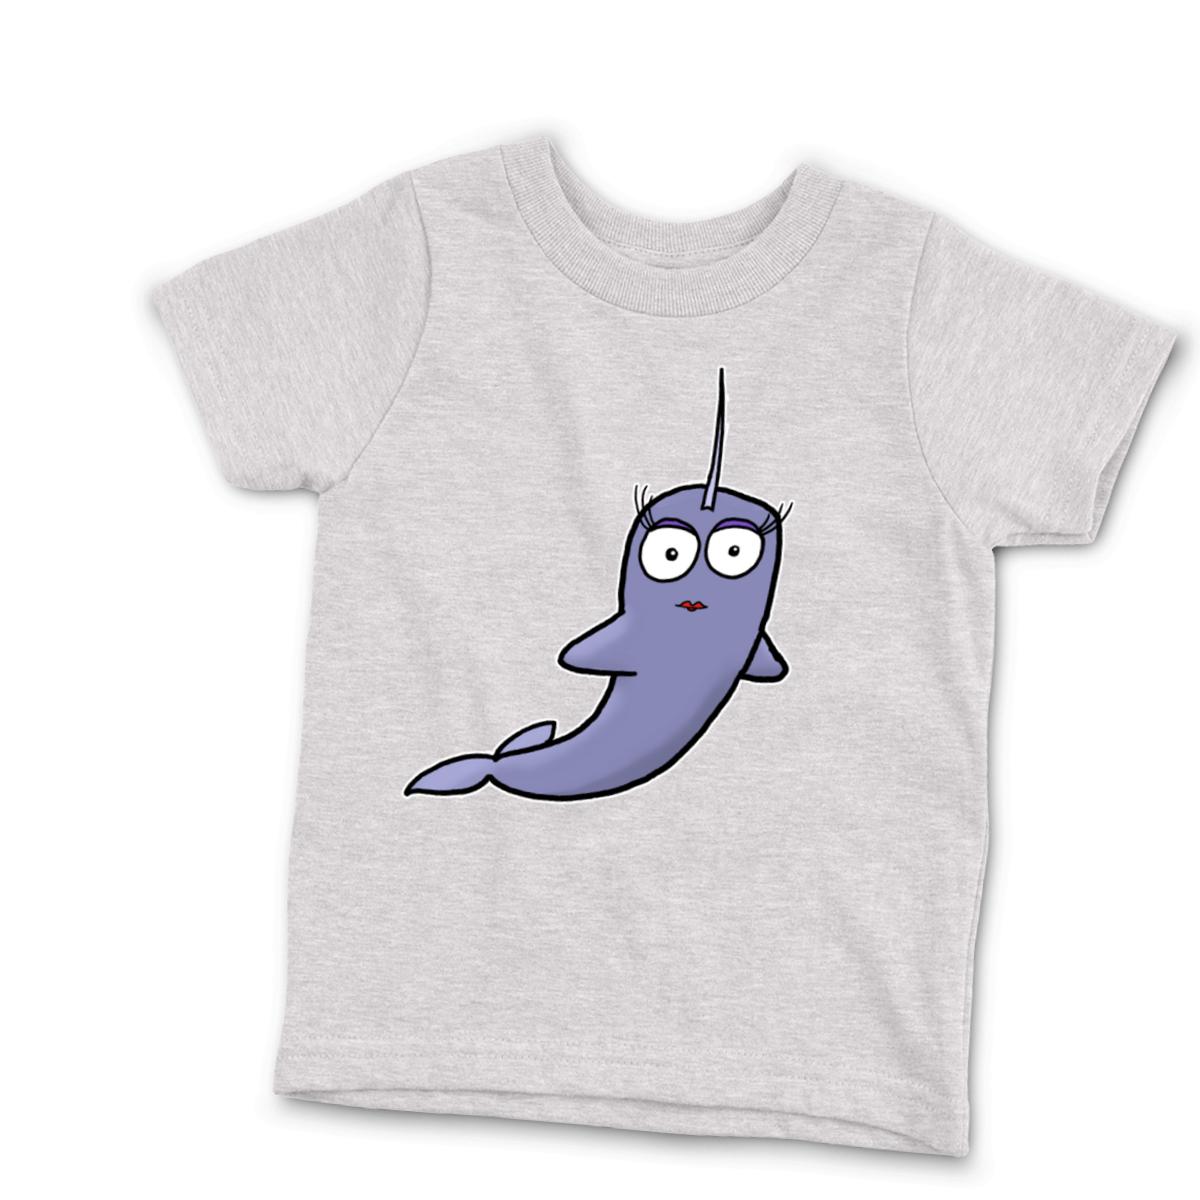 Narwhal Kid's Tee Small heather